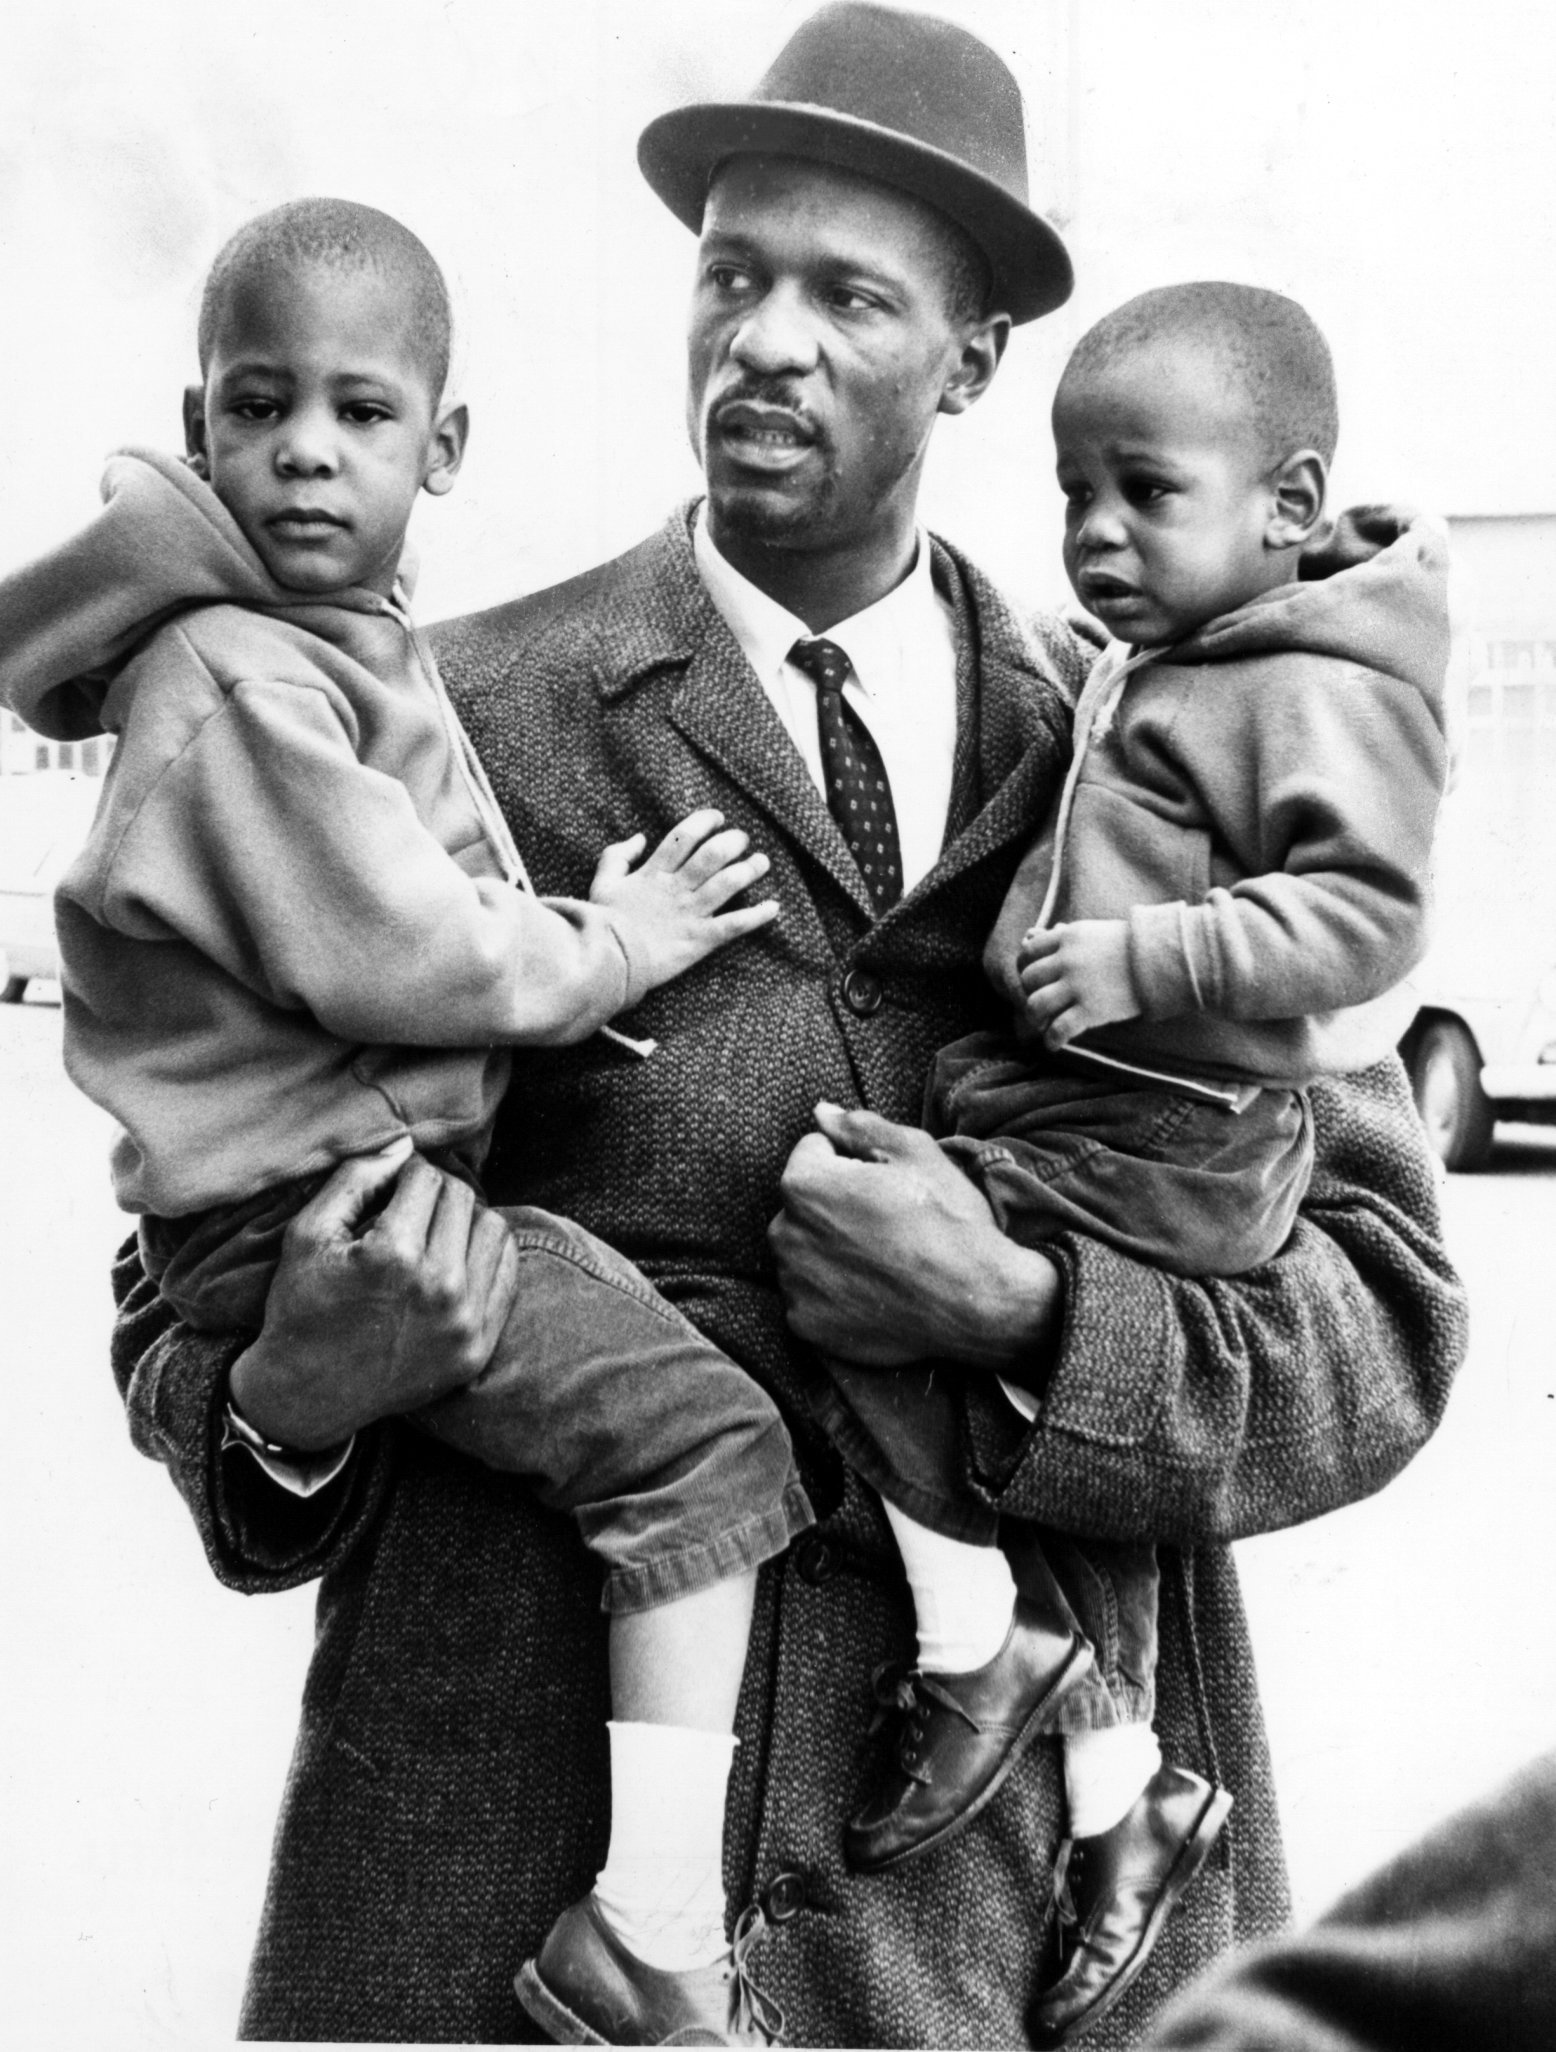 Bill Russell and his sons, Budda, 3, and Jacob, 20 months, circs 1961 | Source: Getty Images